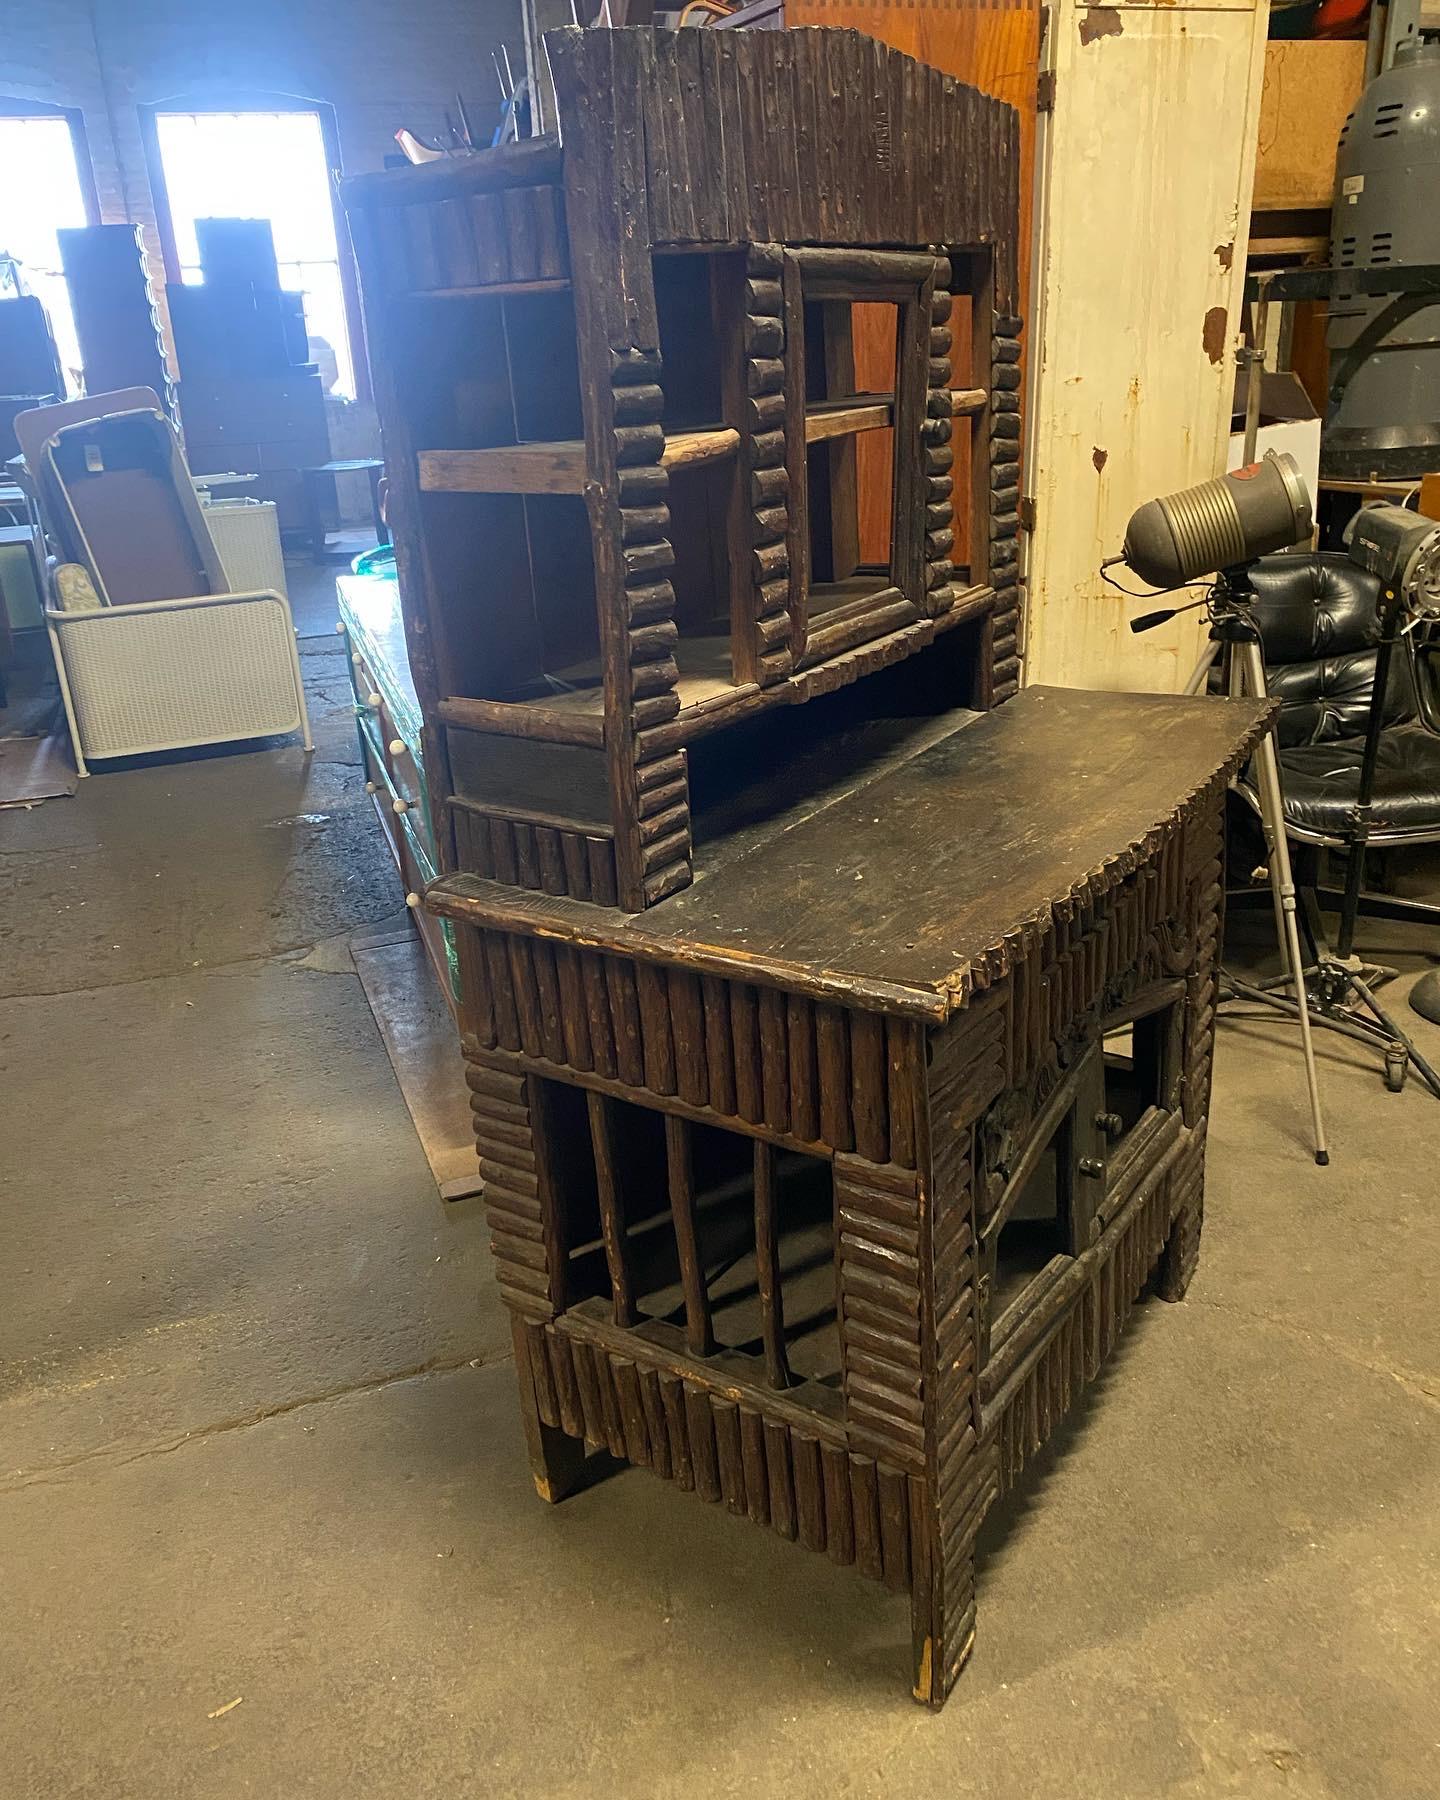 Most unusual and large rustic late 19th century adirondak hutch / cabinet. Tree,twig center door and shelves (top) drawer and two doors (bottom)amazing quality and construction. Not certain but most likely had glass when originally built. Hand